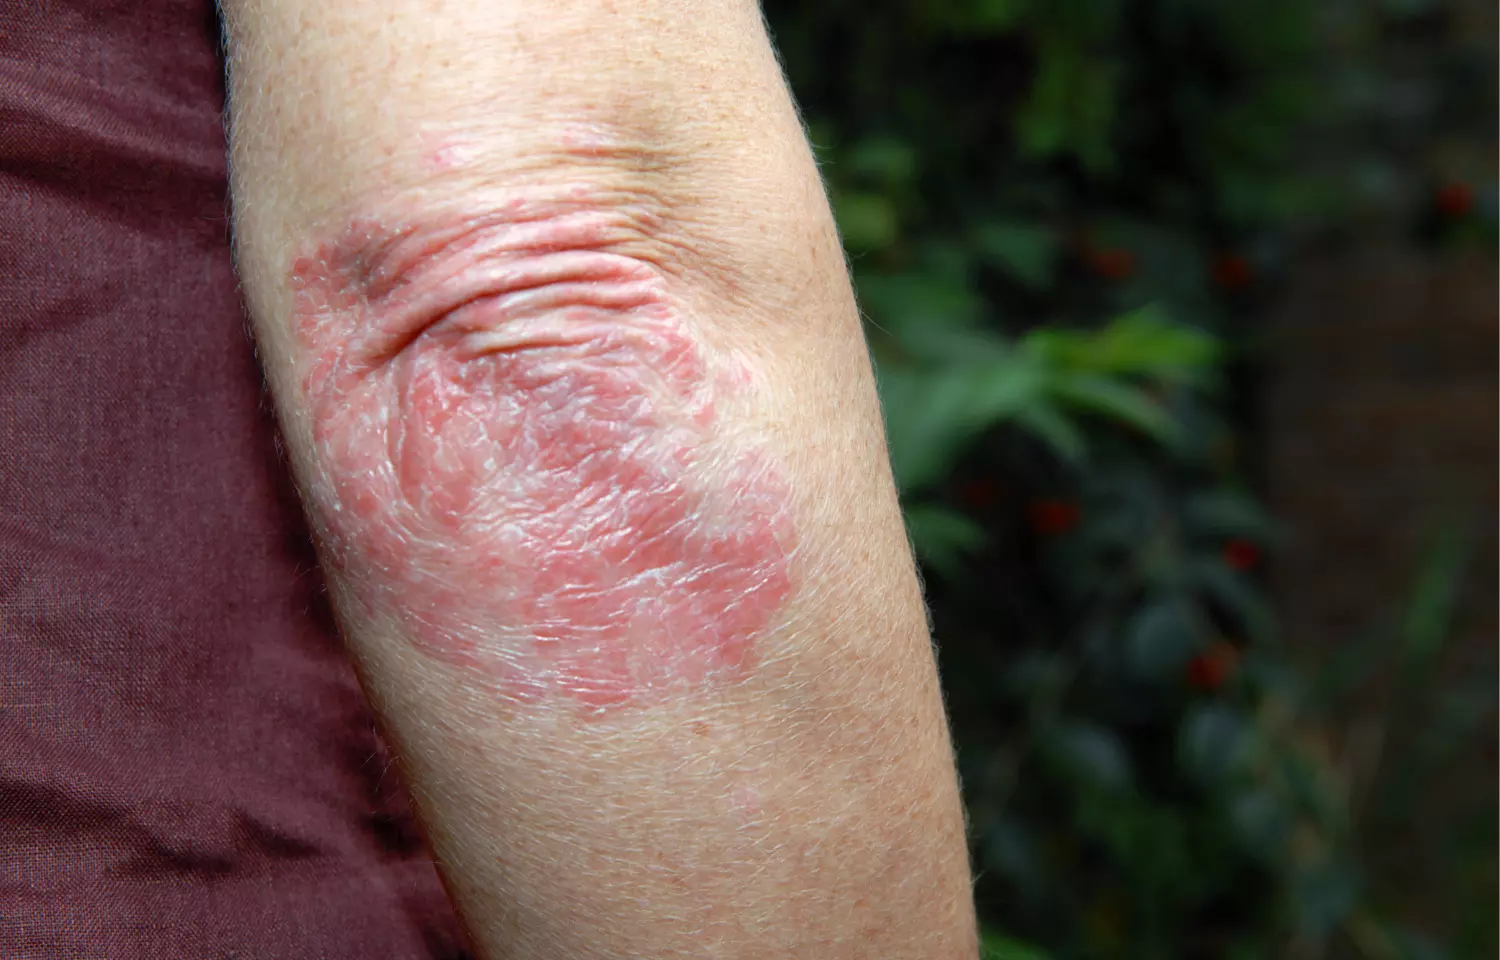 FDA Approves tapinarof cream- first nonsteroidal treatment for plaque psoriasis